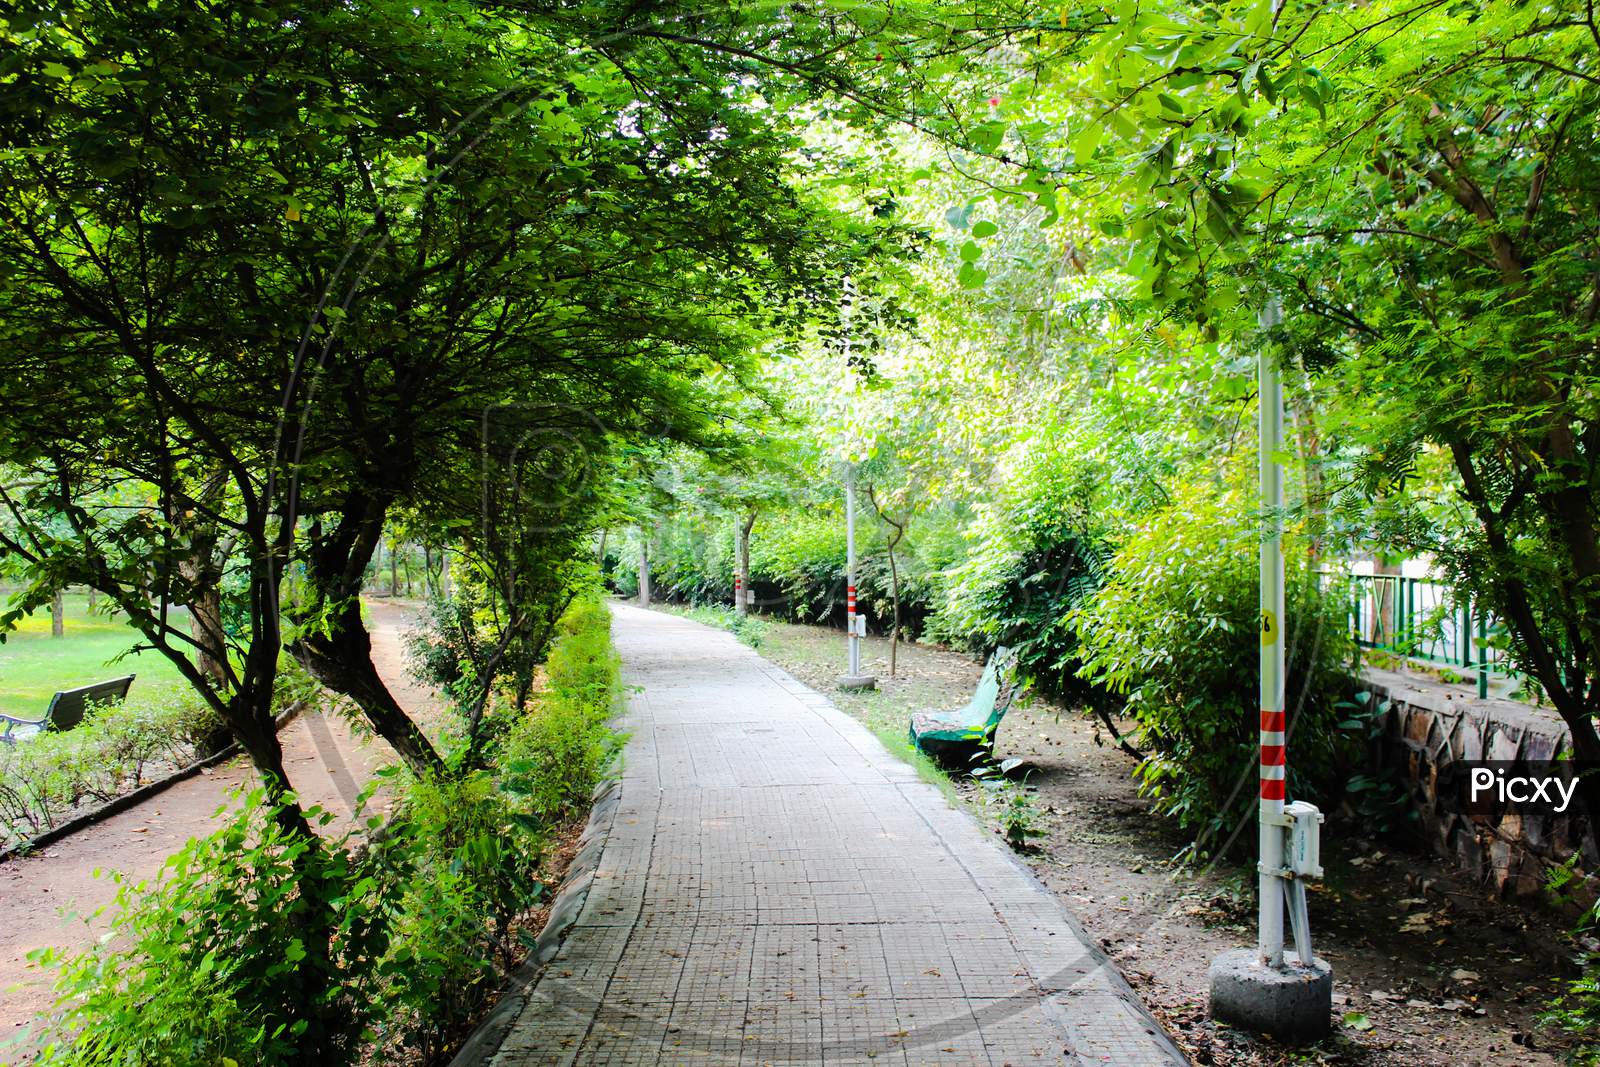 A picture of way in garden